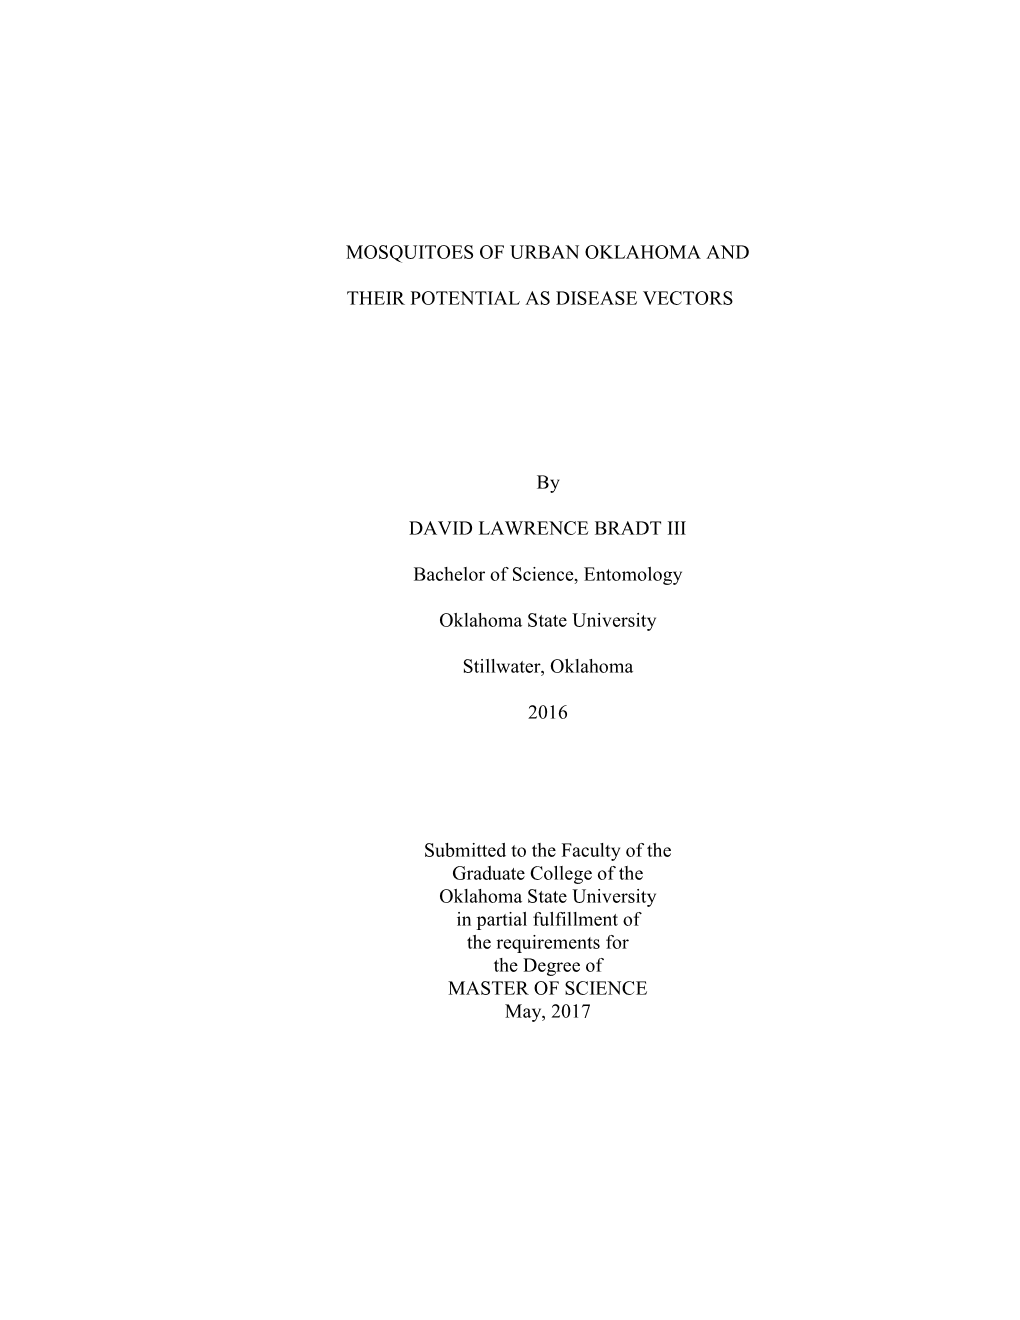 MOSQUITOES of URBAN OKLAHOMA and THEIR POTENTIAL AS DISEASE VECTORS by DAVID LAWRENCE BRADT III Bachelor of Science, Entomology